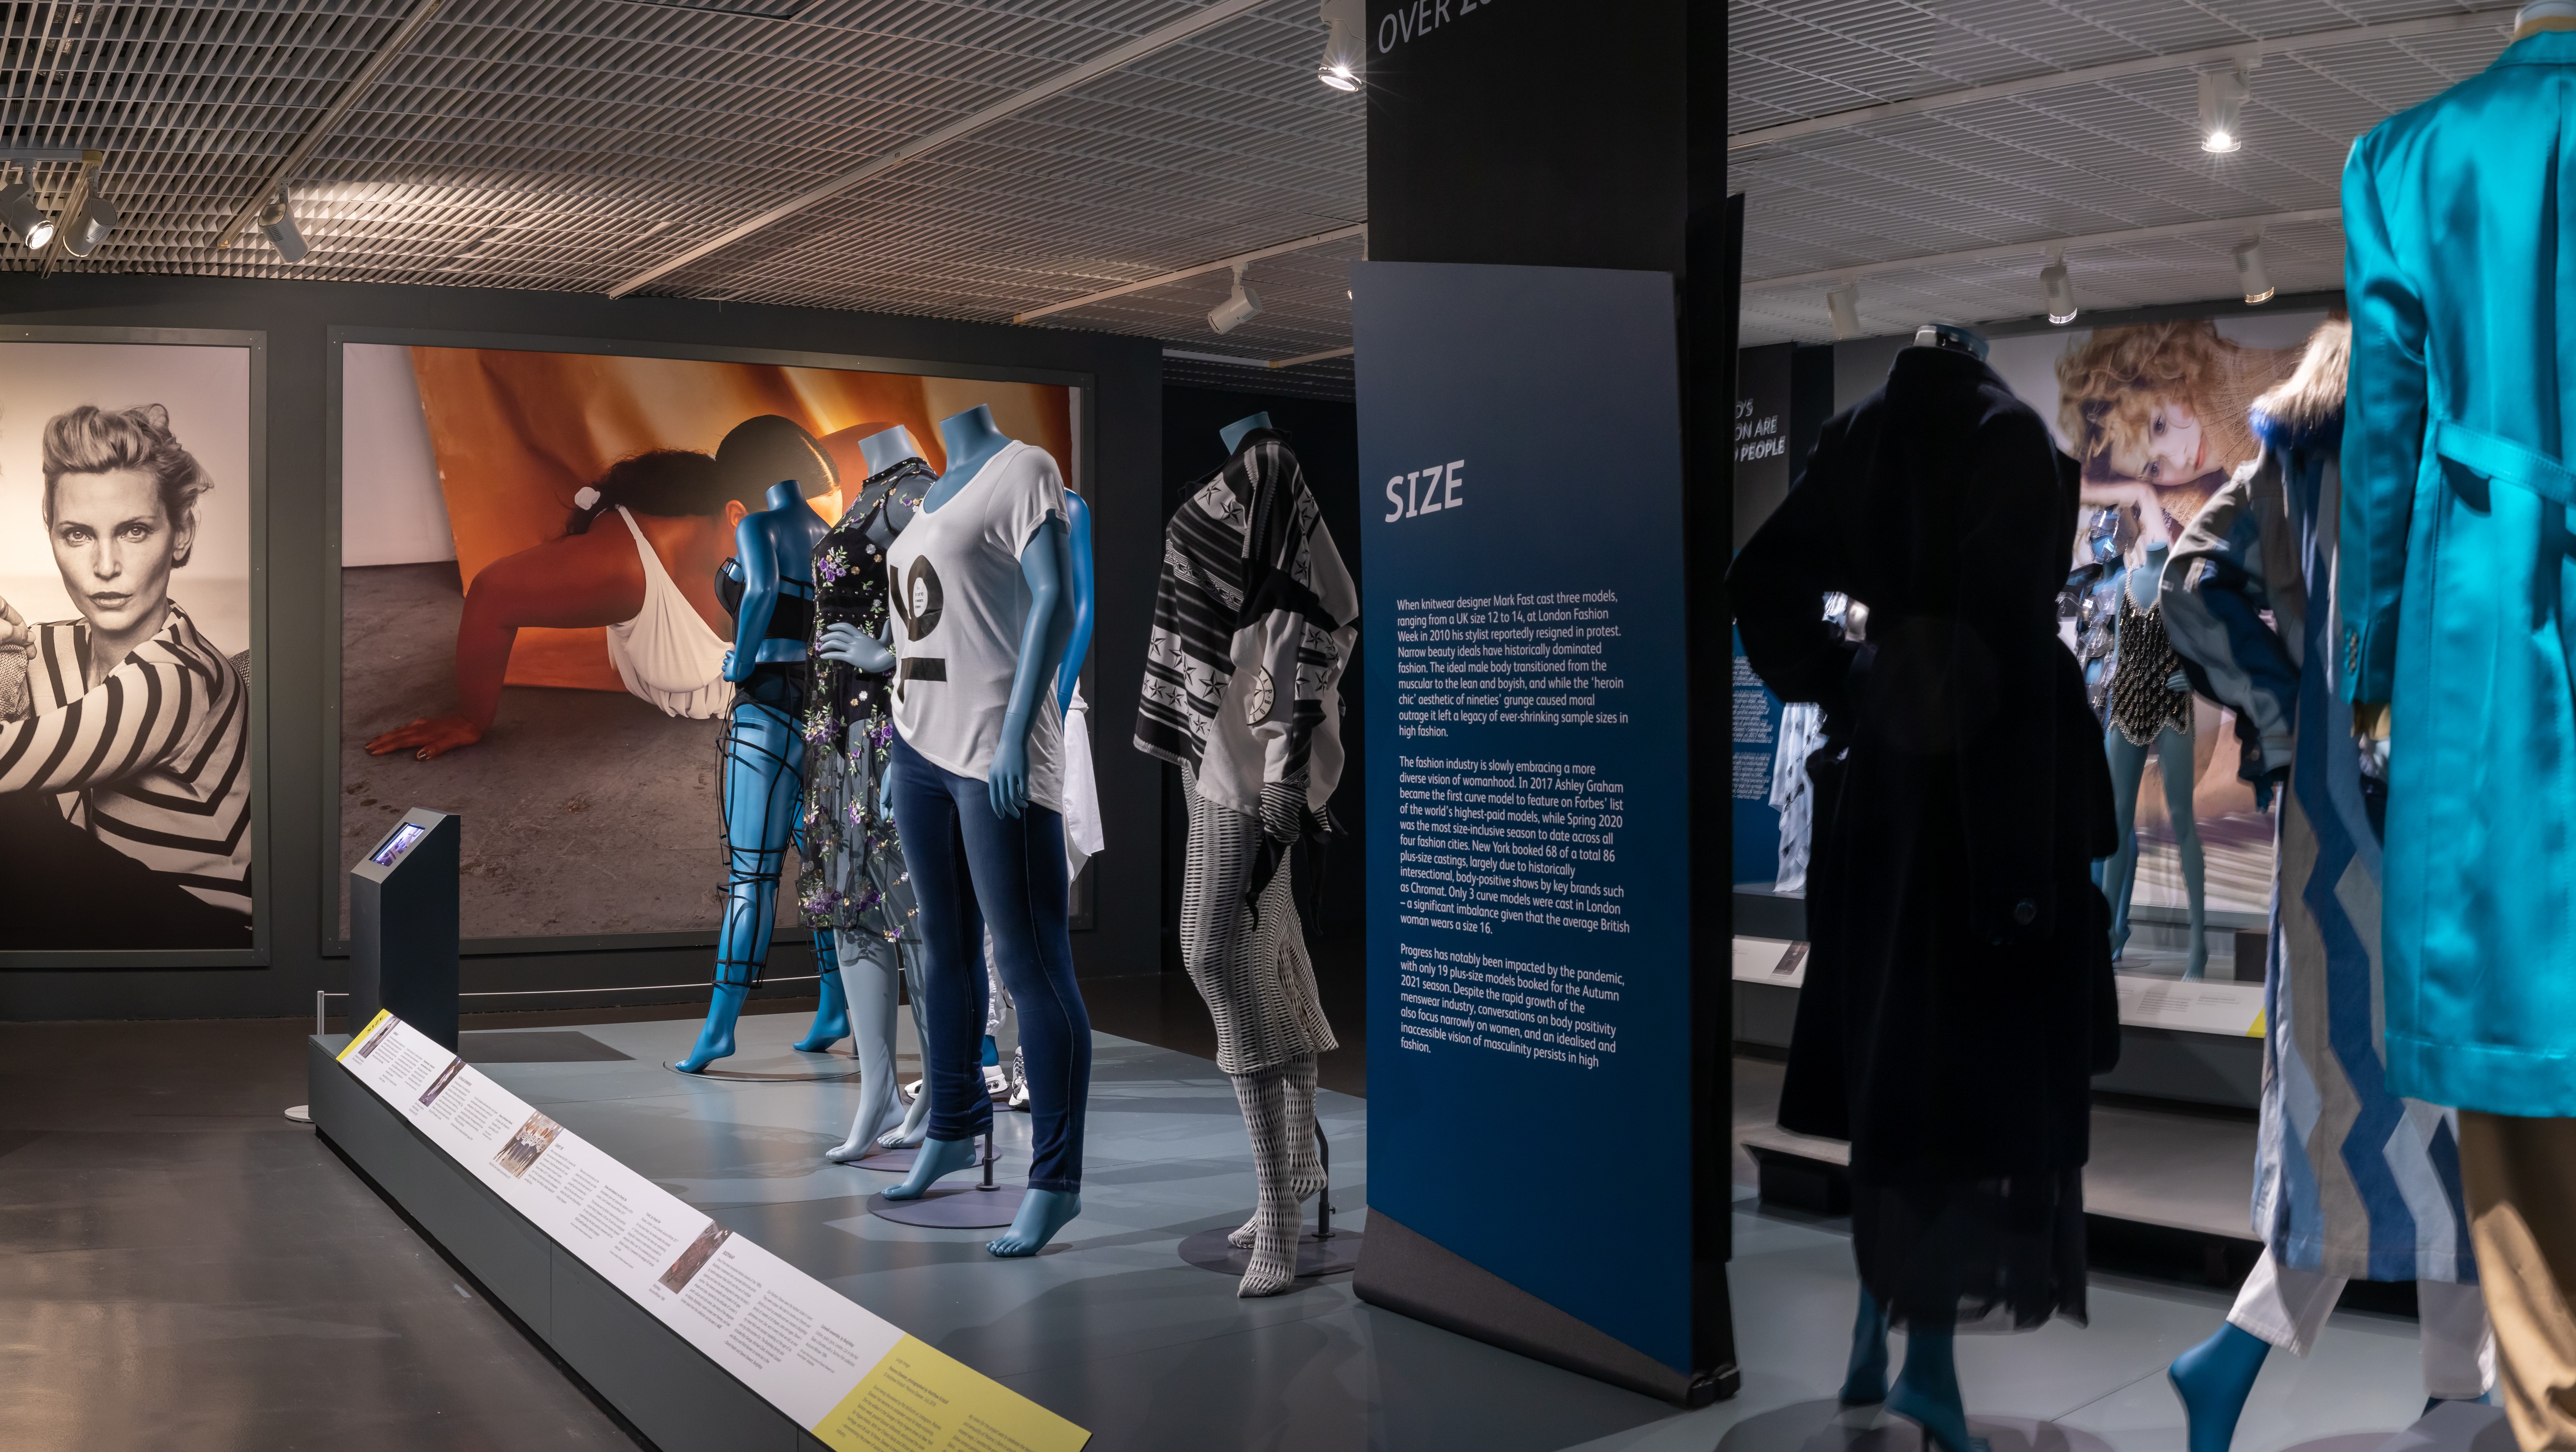 Ten mannequins arranged across the exhibition with photographic backdrops.